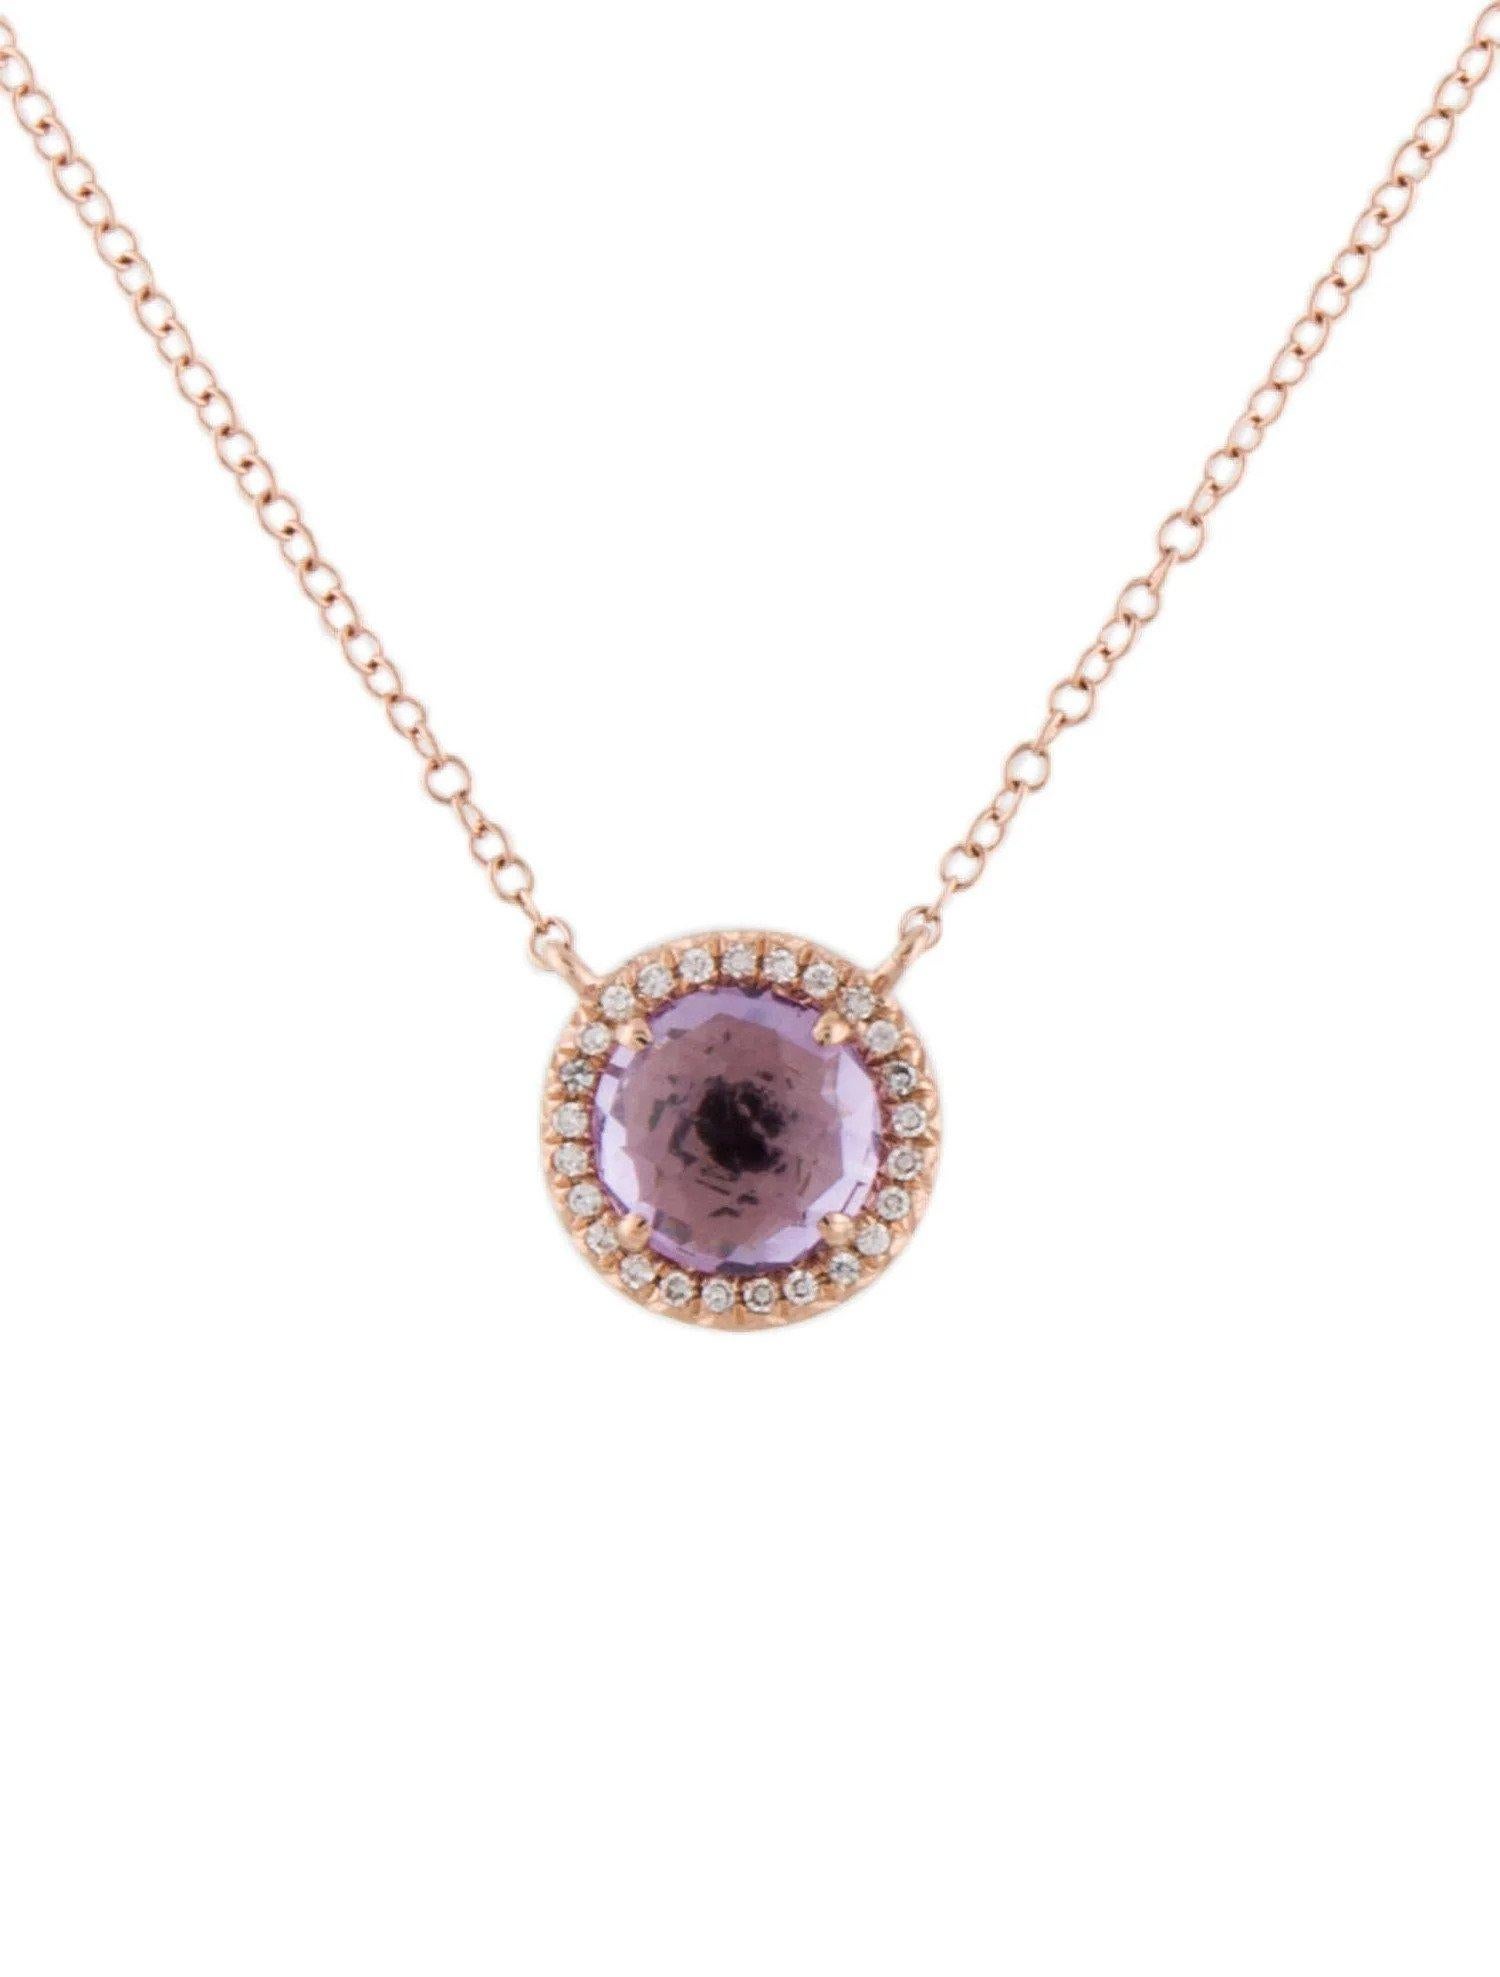 This Amethyst & Diamond Pendant is a stunning and timeless accessory that can add a touch of glamour and sophistication to any outfit. 

This pendant features a 0.95 Carat Round Pink Amethyst, with a Diamond Halo comprised of 0.06 Carats of Single